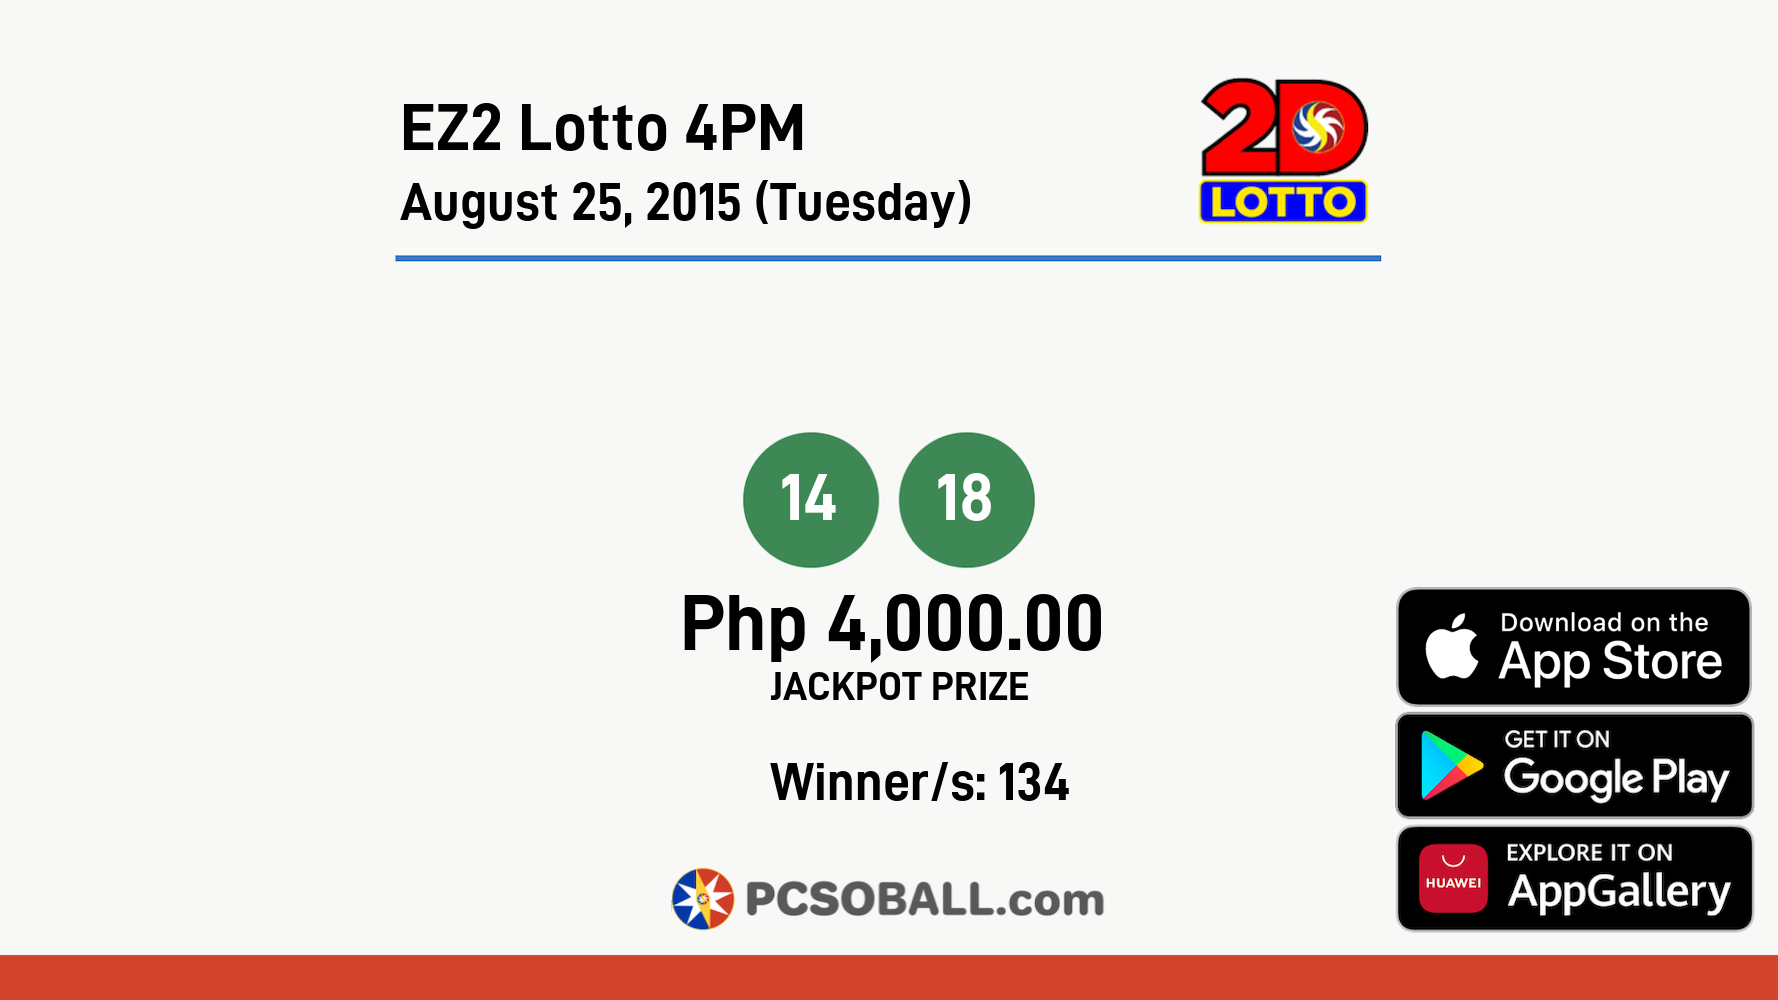 EZ2 Lotto 4PM August 25, 2015 (Tuesday) Result